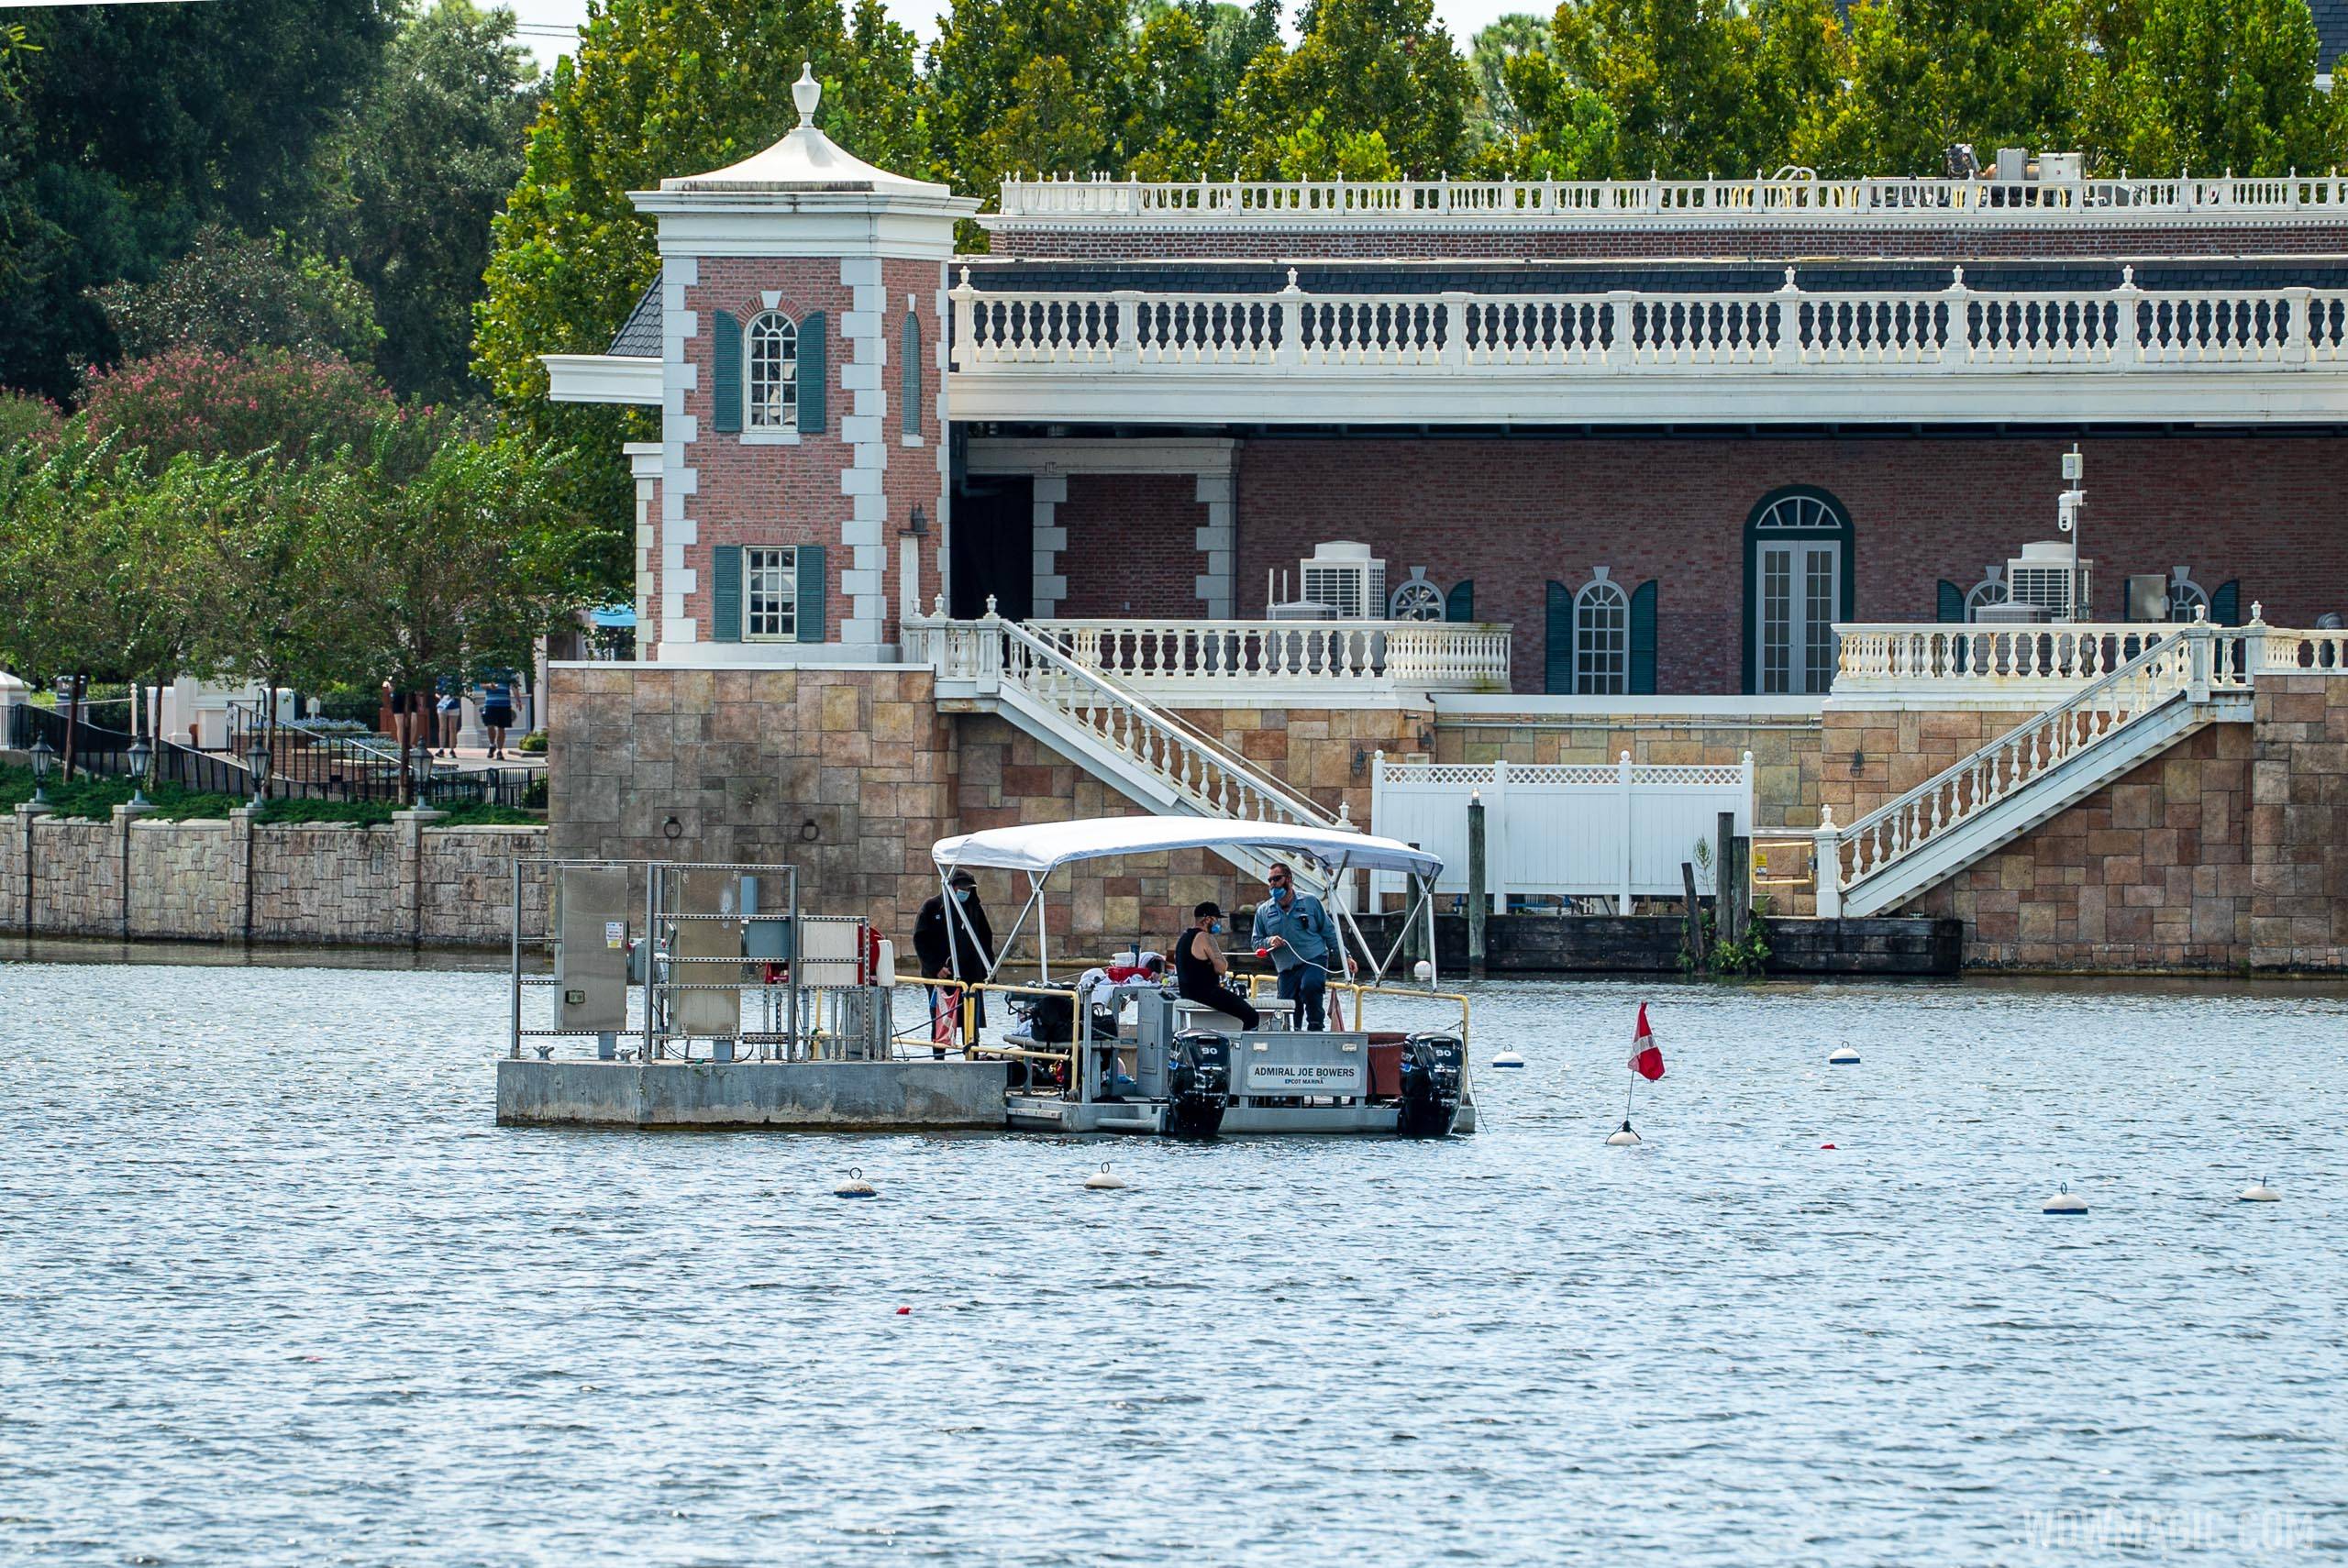 Divers in the World Showcase Lagoon